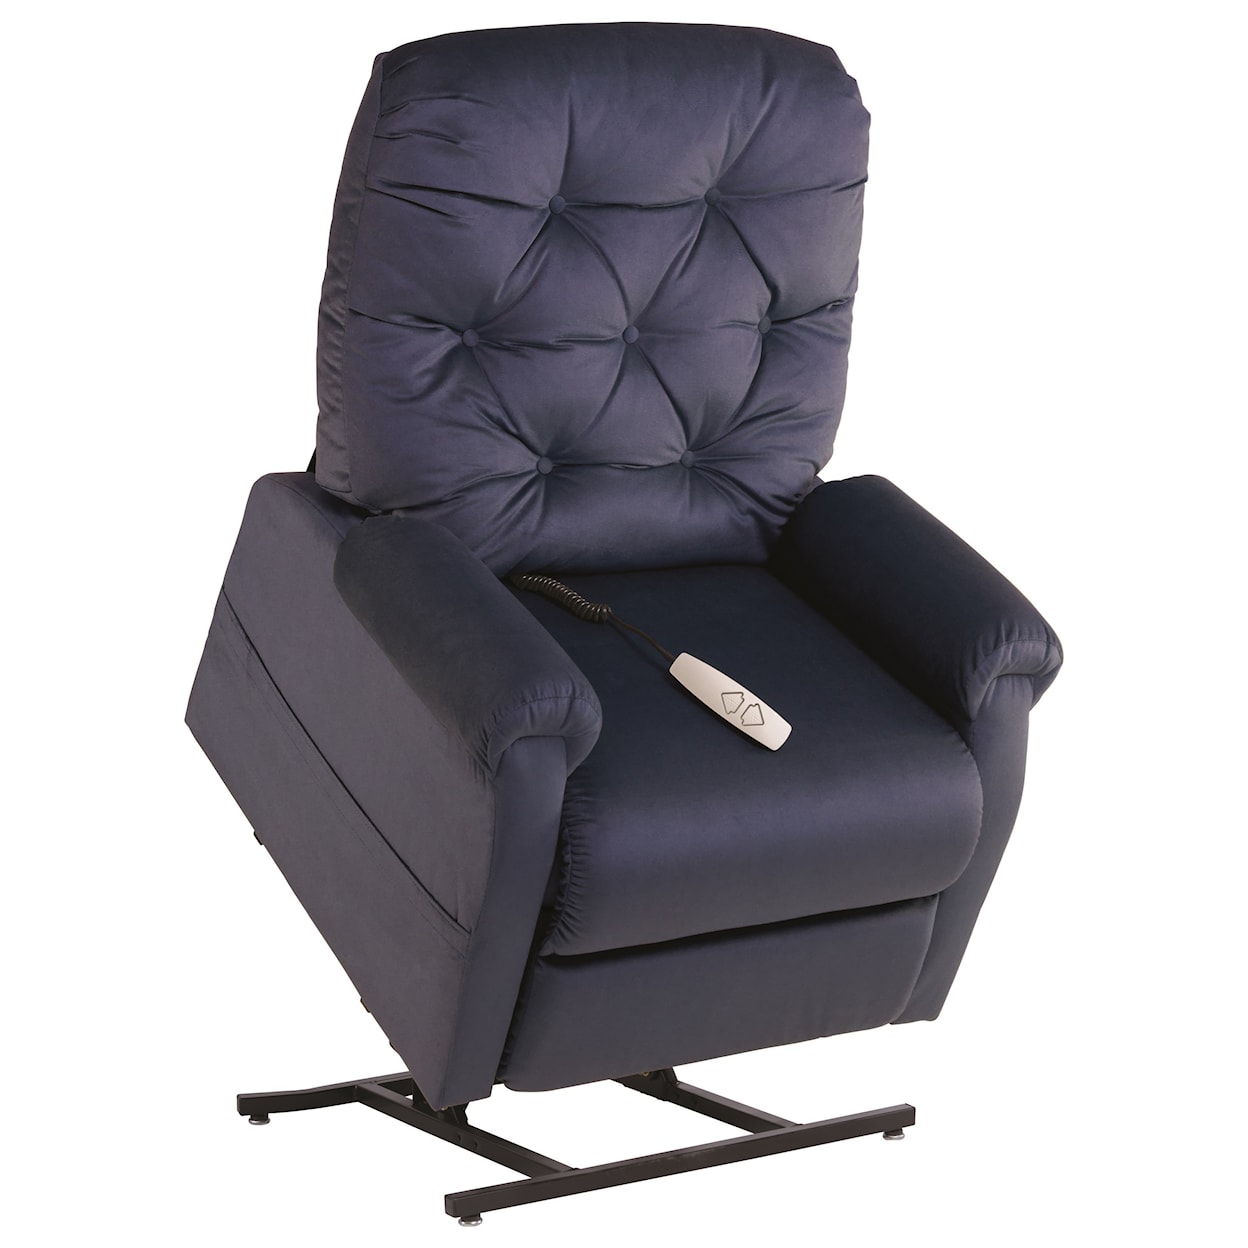 Ultimate Power Recliner Lift Chairs 3-Position Reclining Chaise Lounger